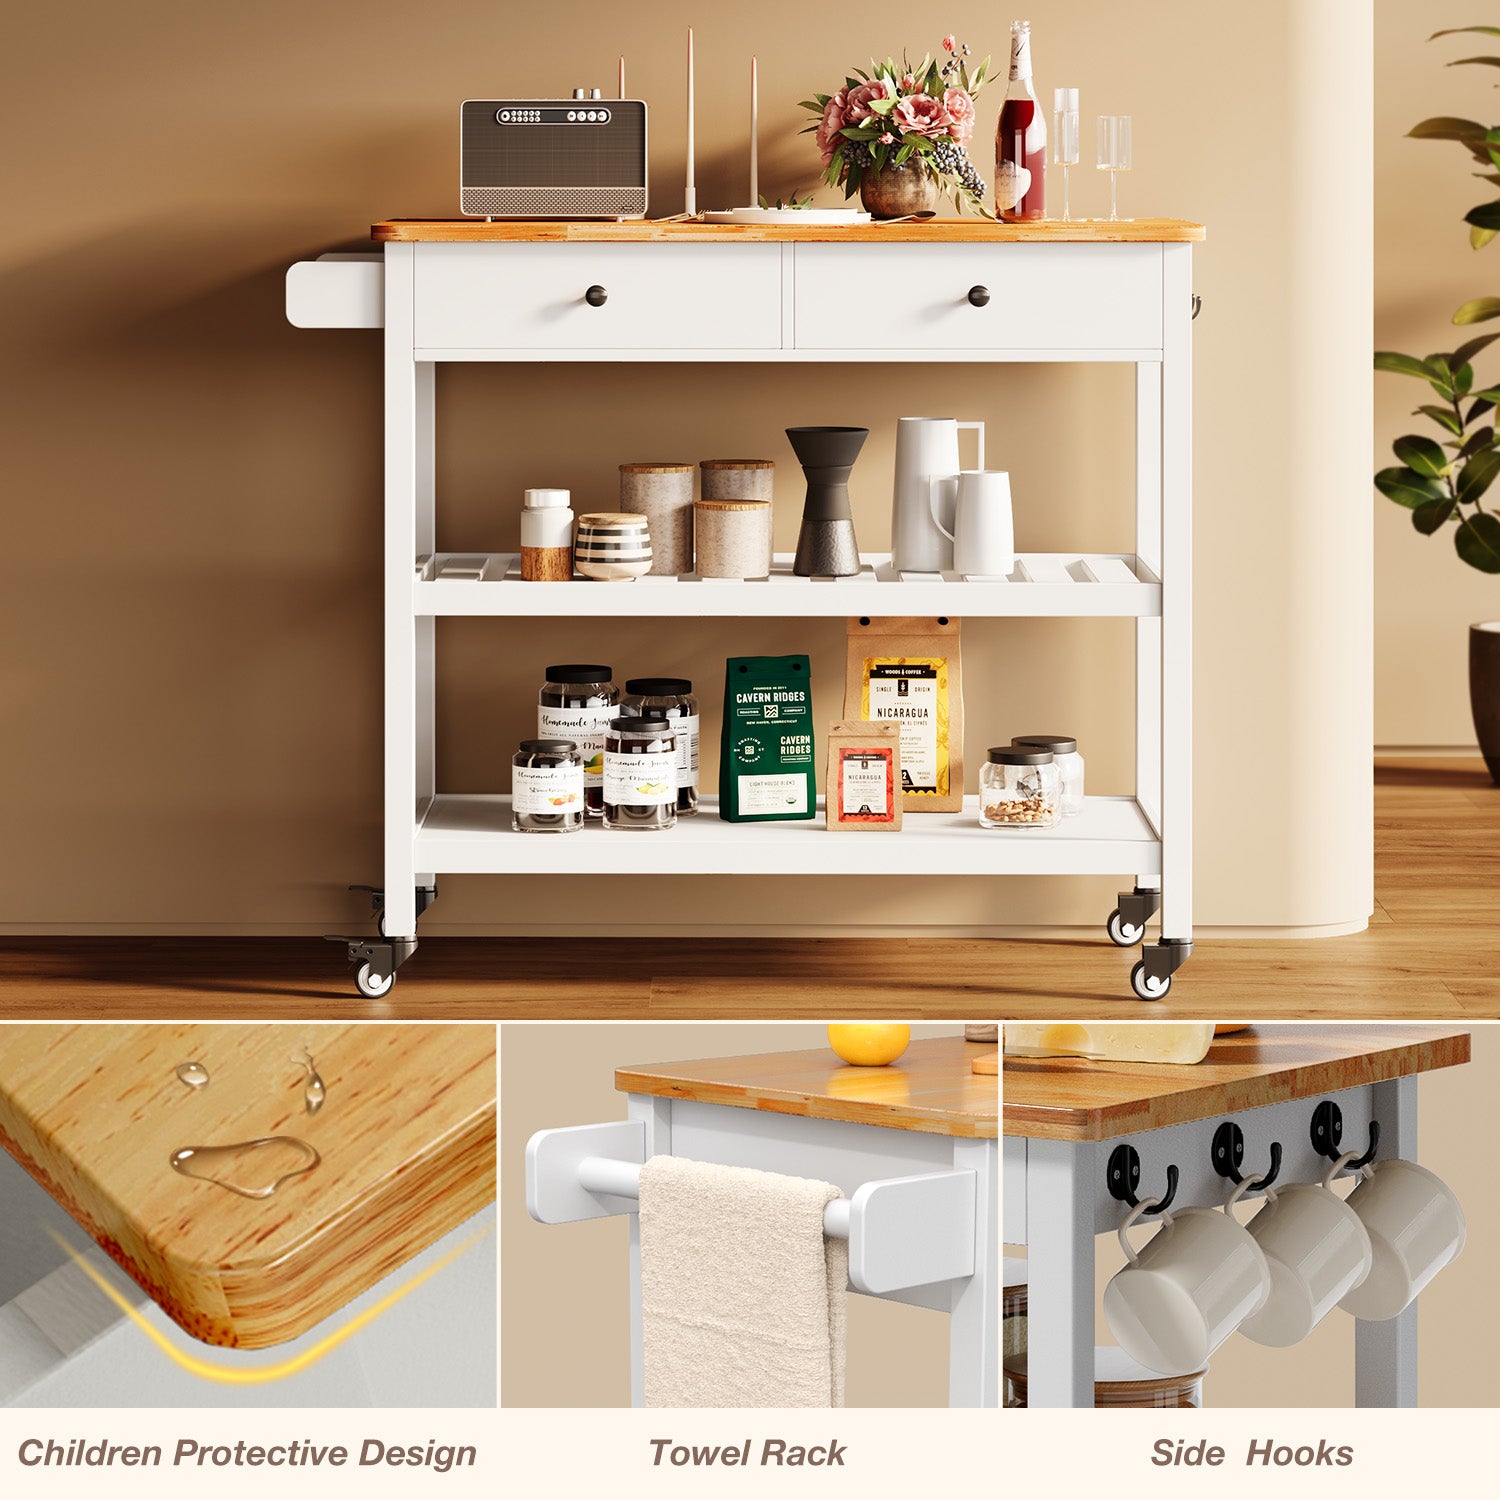 Gizoon KC41 Kitchen Island Cart on Wheels with 40'' Wood Tabletop